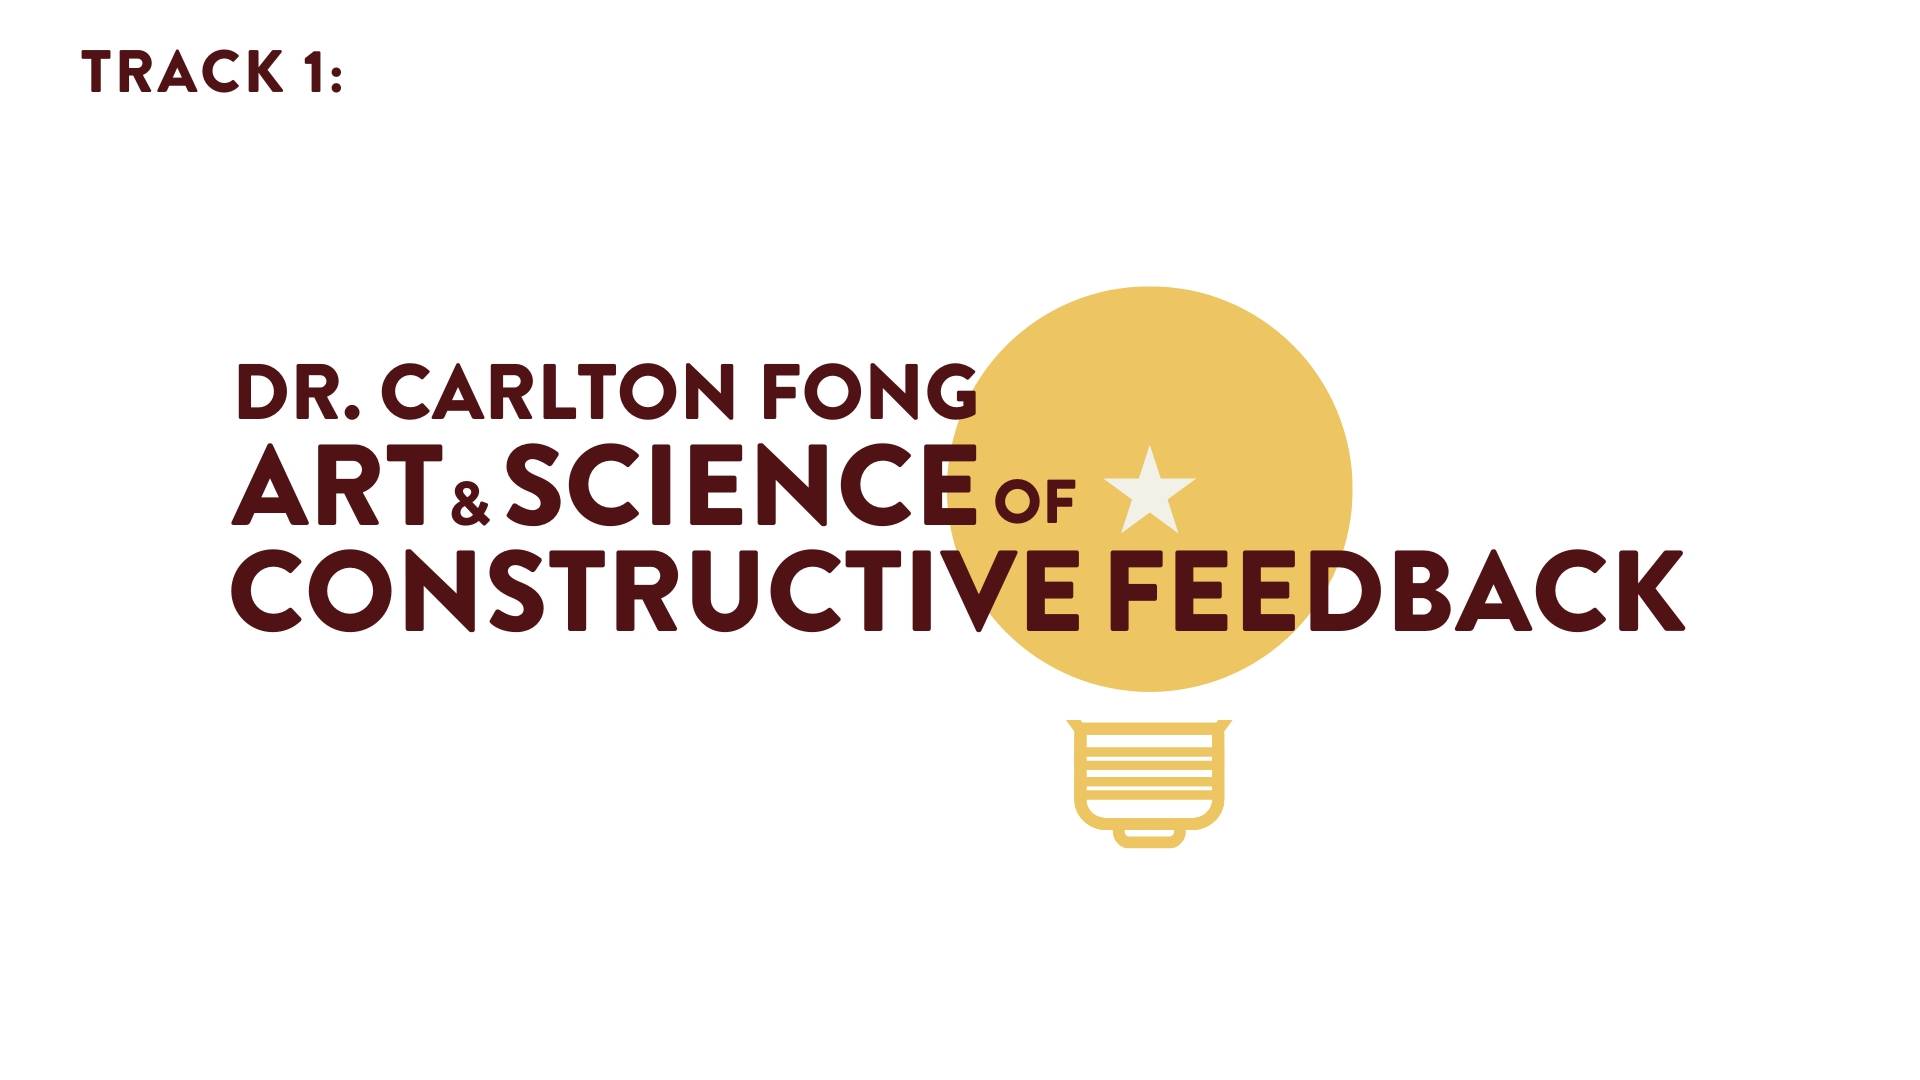 The Art and Science of Constructive Feedback